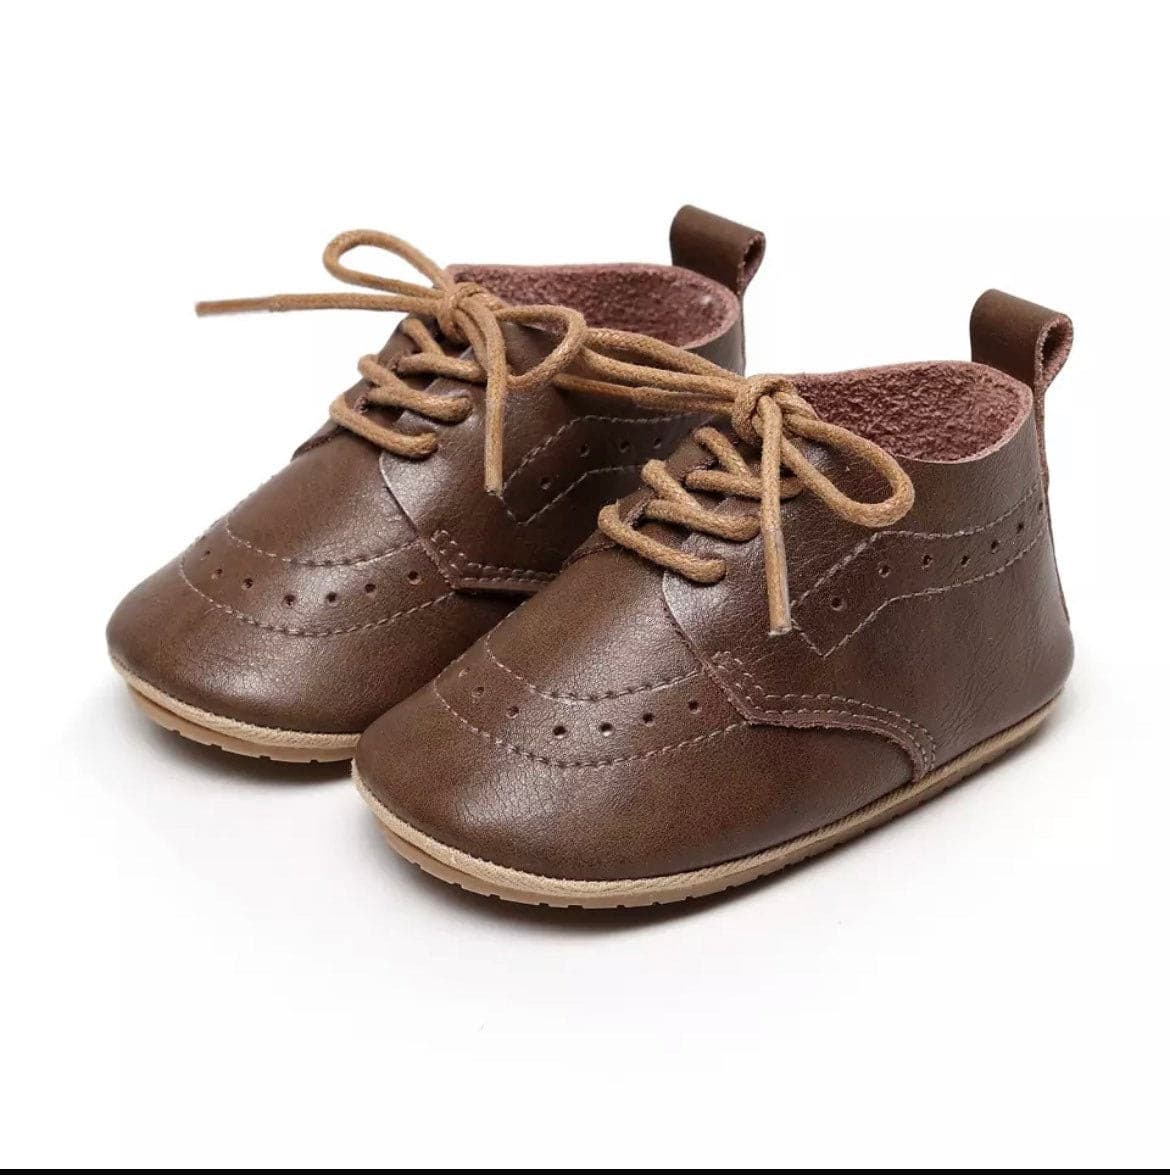 Baby Oxford Brogues - Handmade Genuine Leather Baby Shoes, Chocolate Brown.